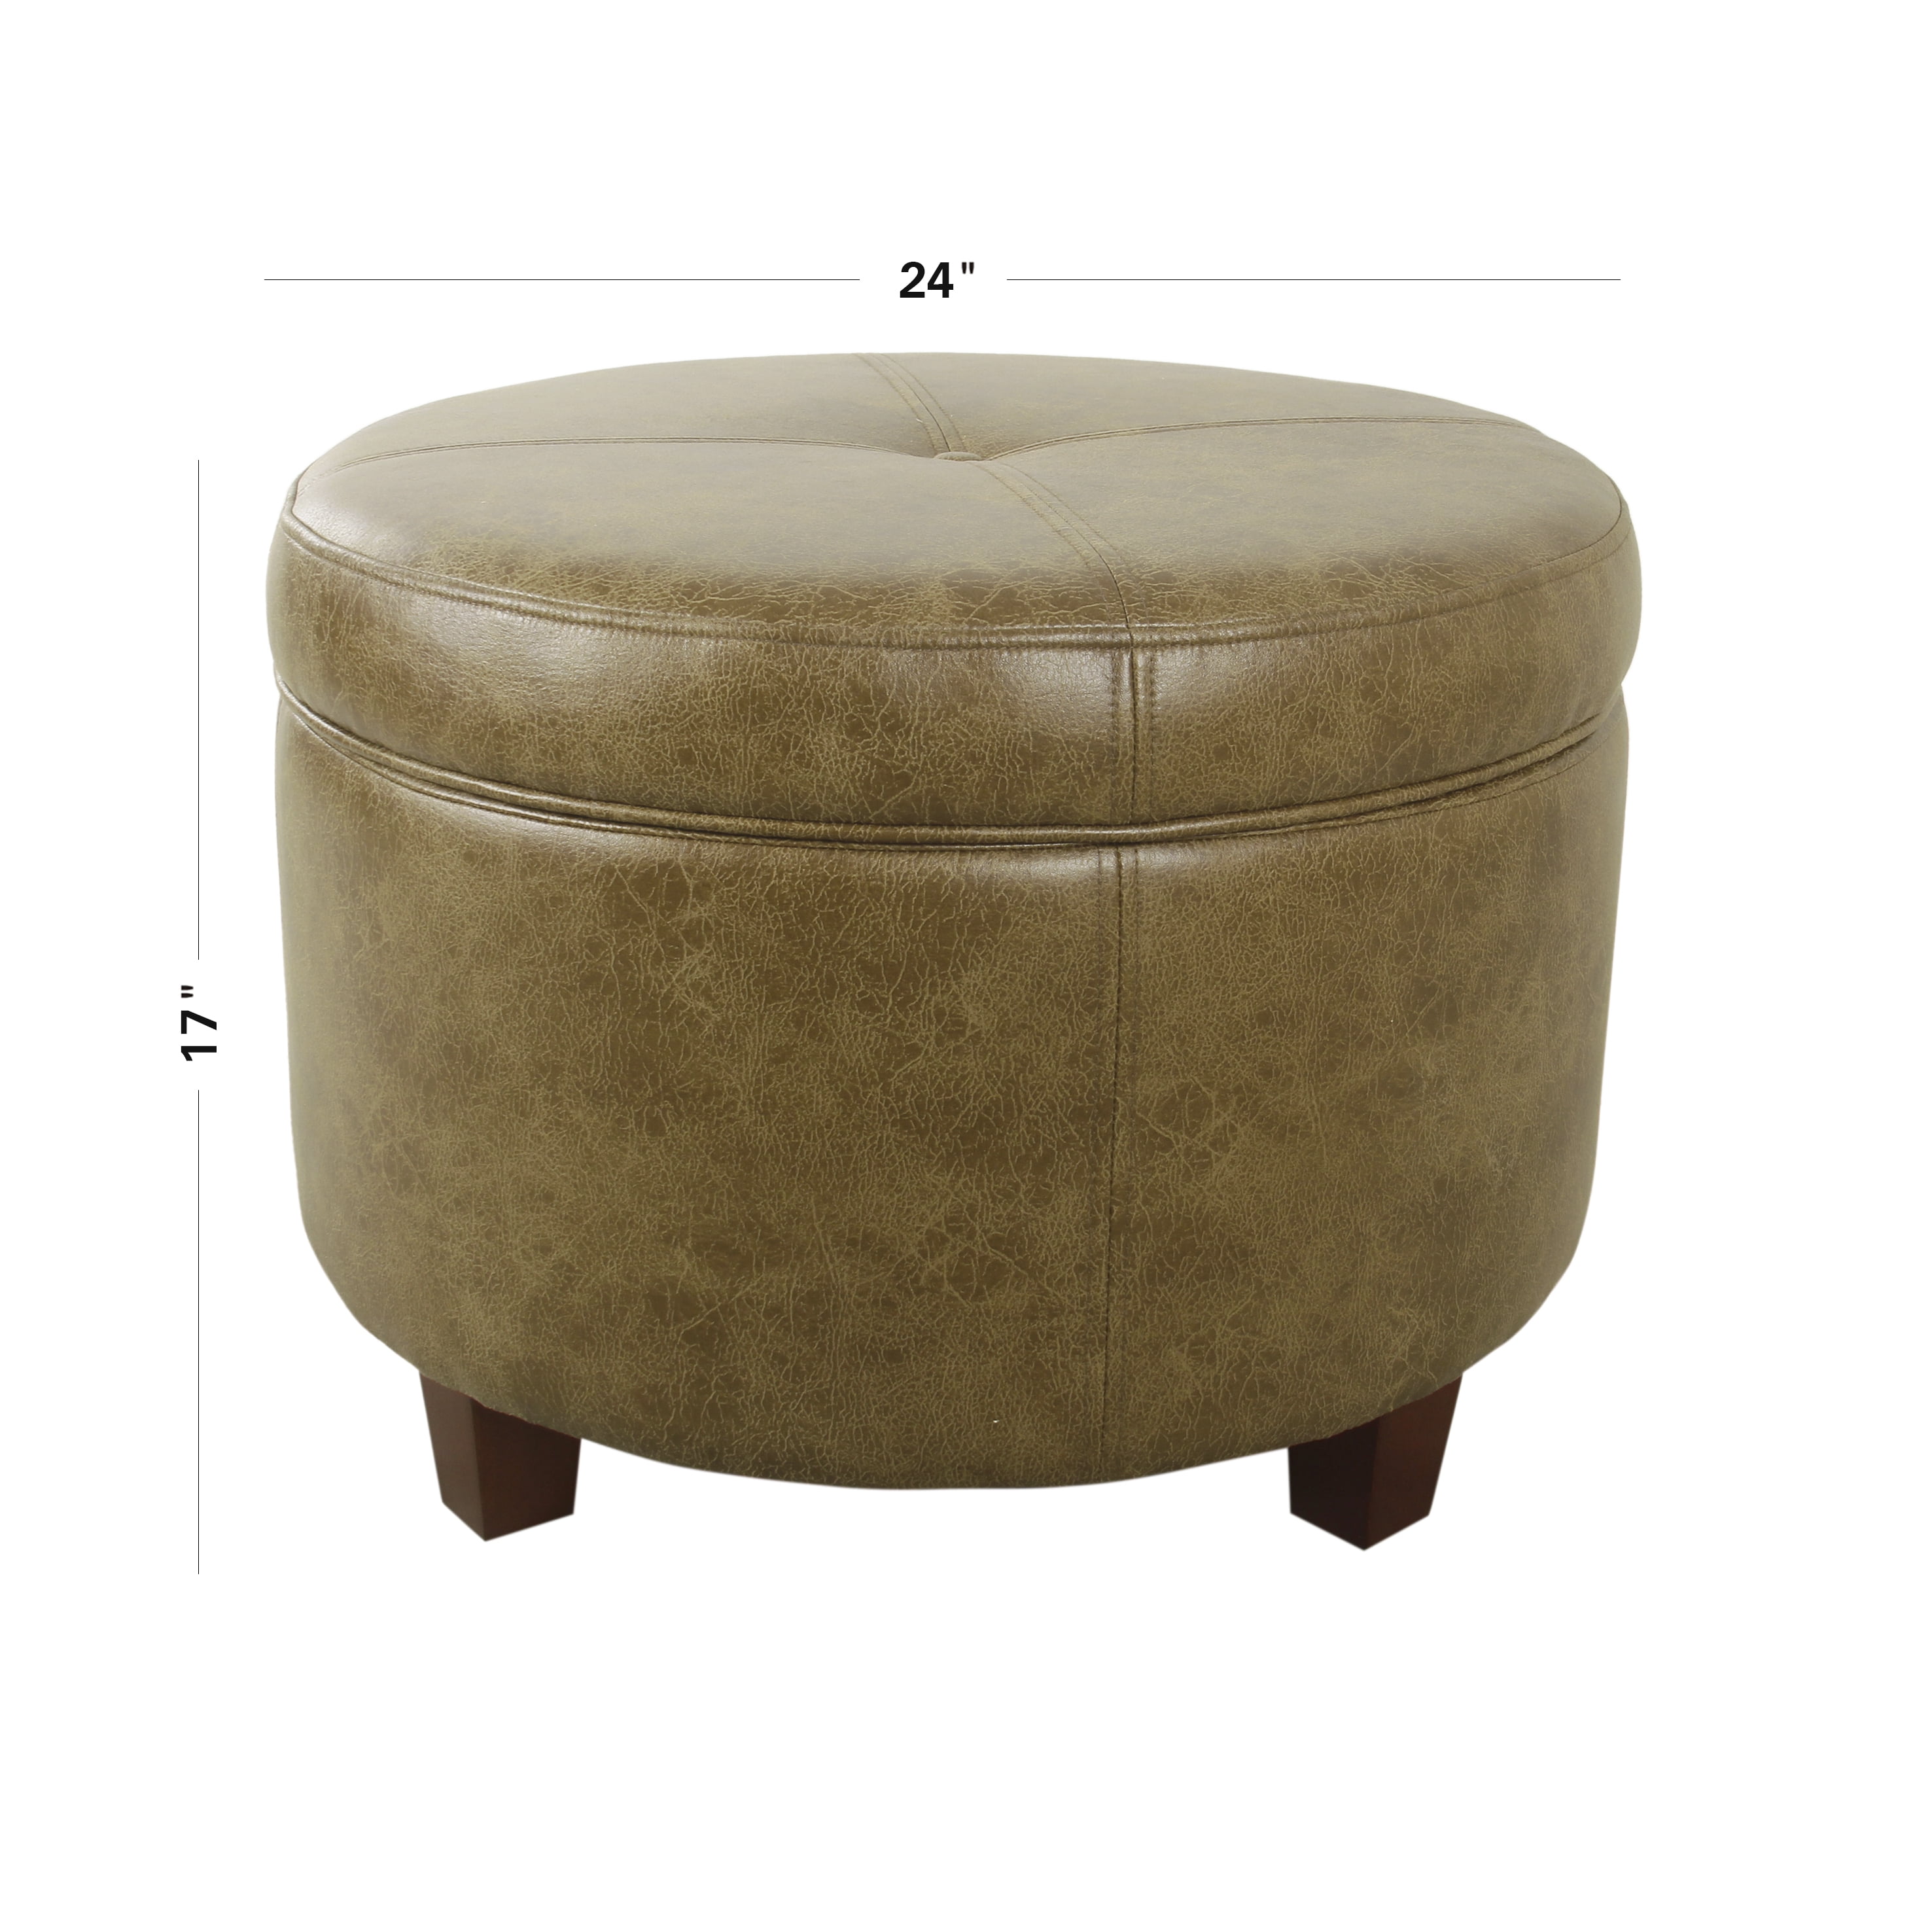 Homepop Large Leatherette Storage, Distressed Leather Ottoman With Storage